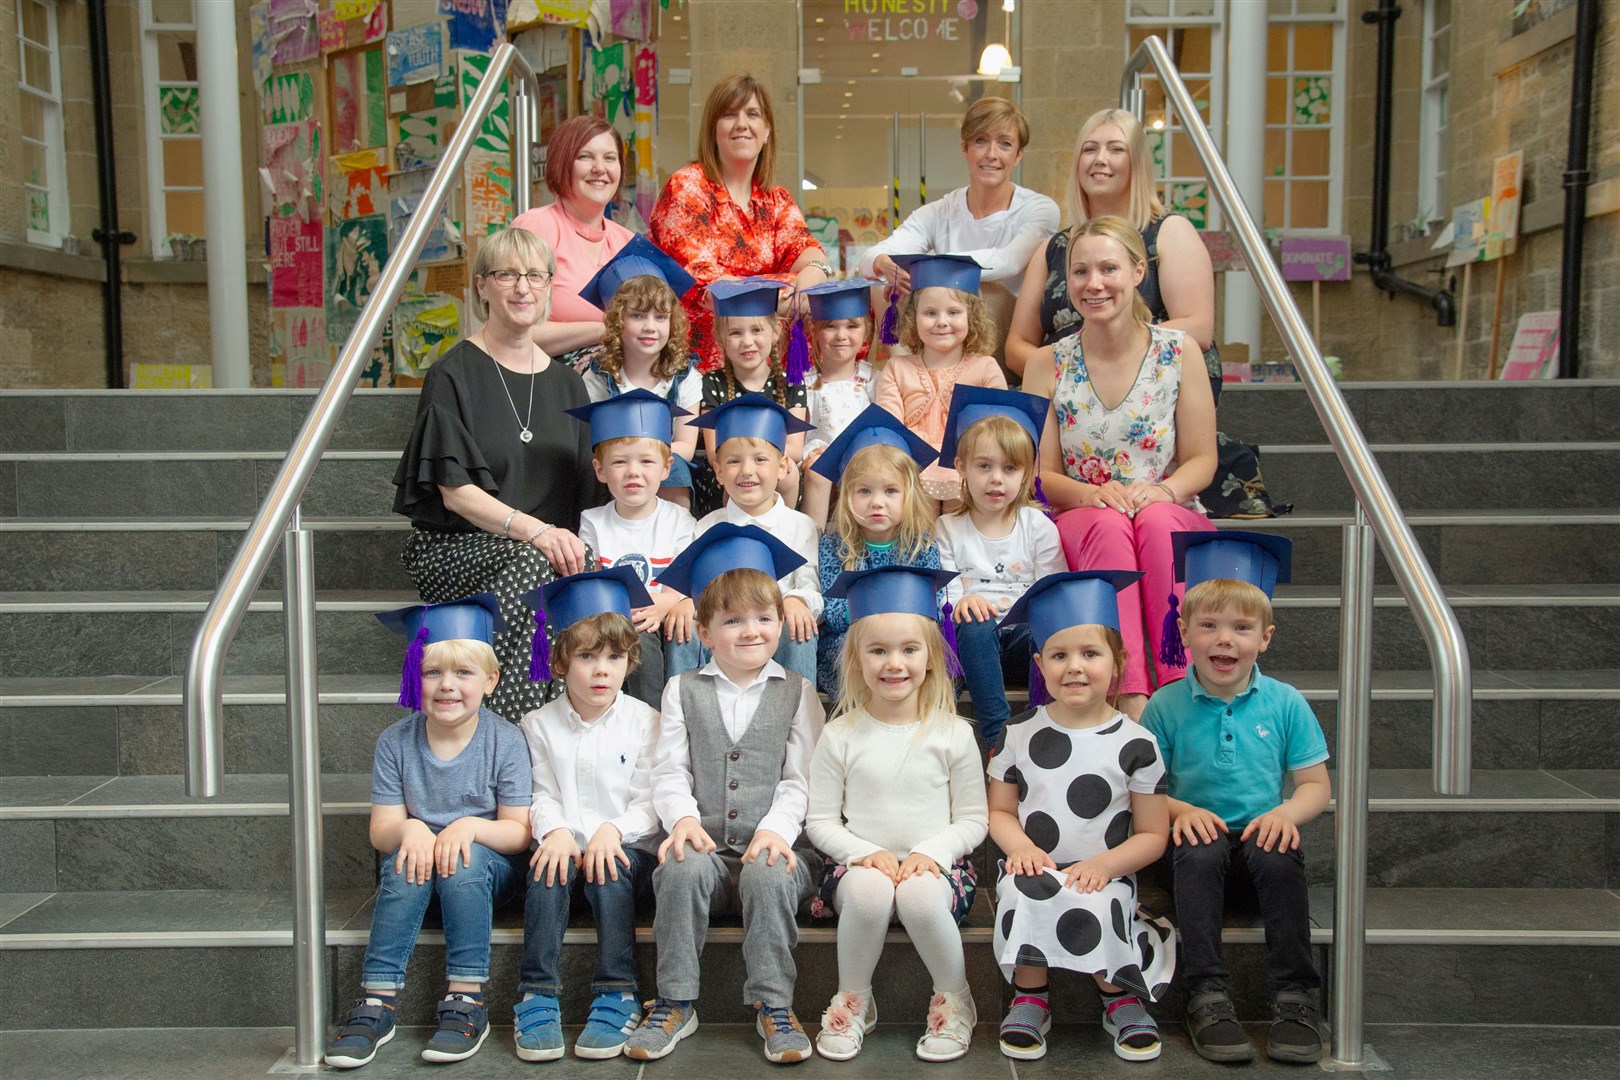 Nursery children at Moray College are joined by staff ahead of their graduation ceremony. Picture: Daniel Forsyth. Image No.044232.